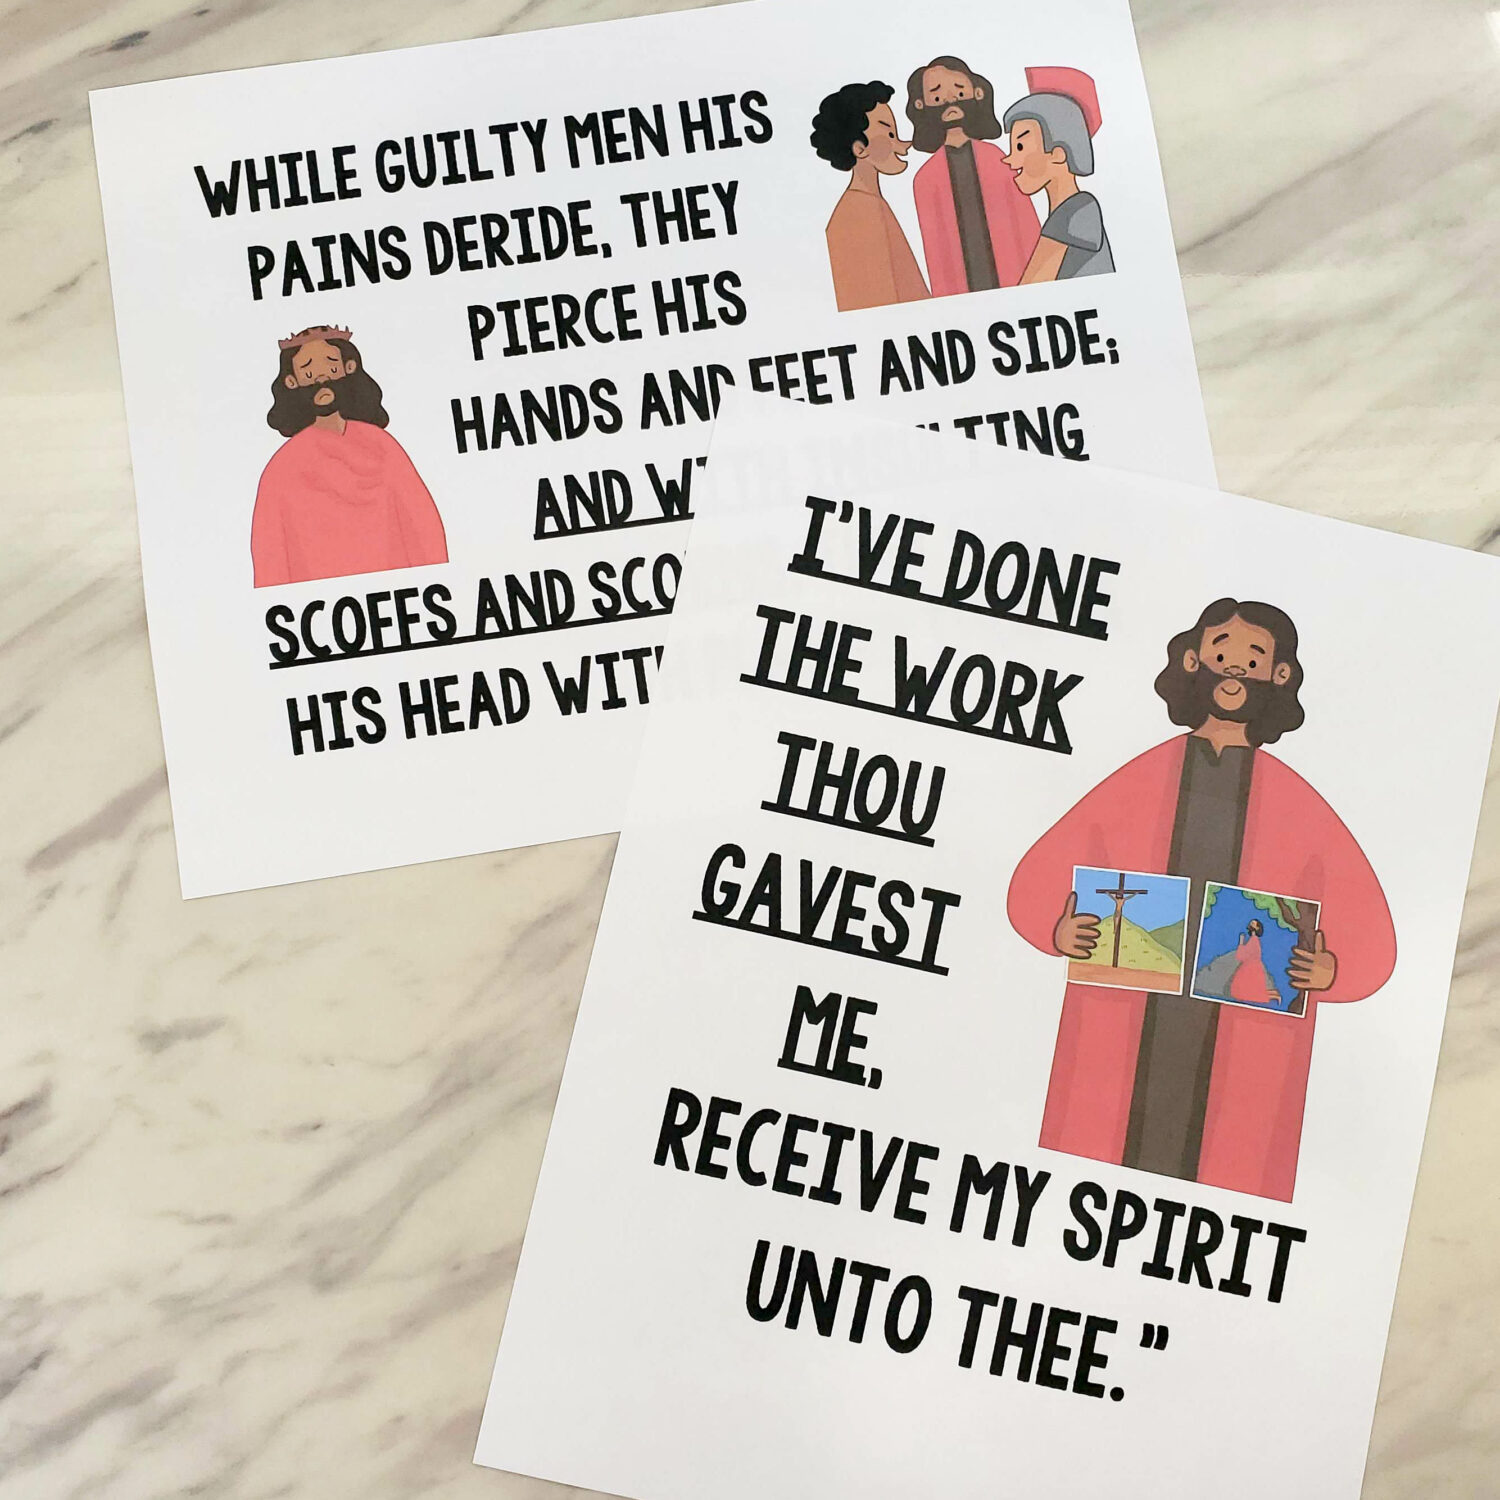 Behold the Great Redeemer Die Flip Chart & Visual Aids printable song helps for LDS Primary music leaders for singing time